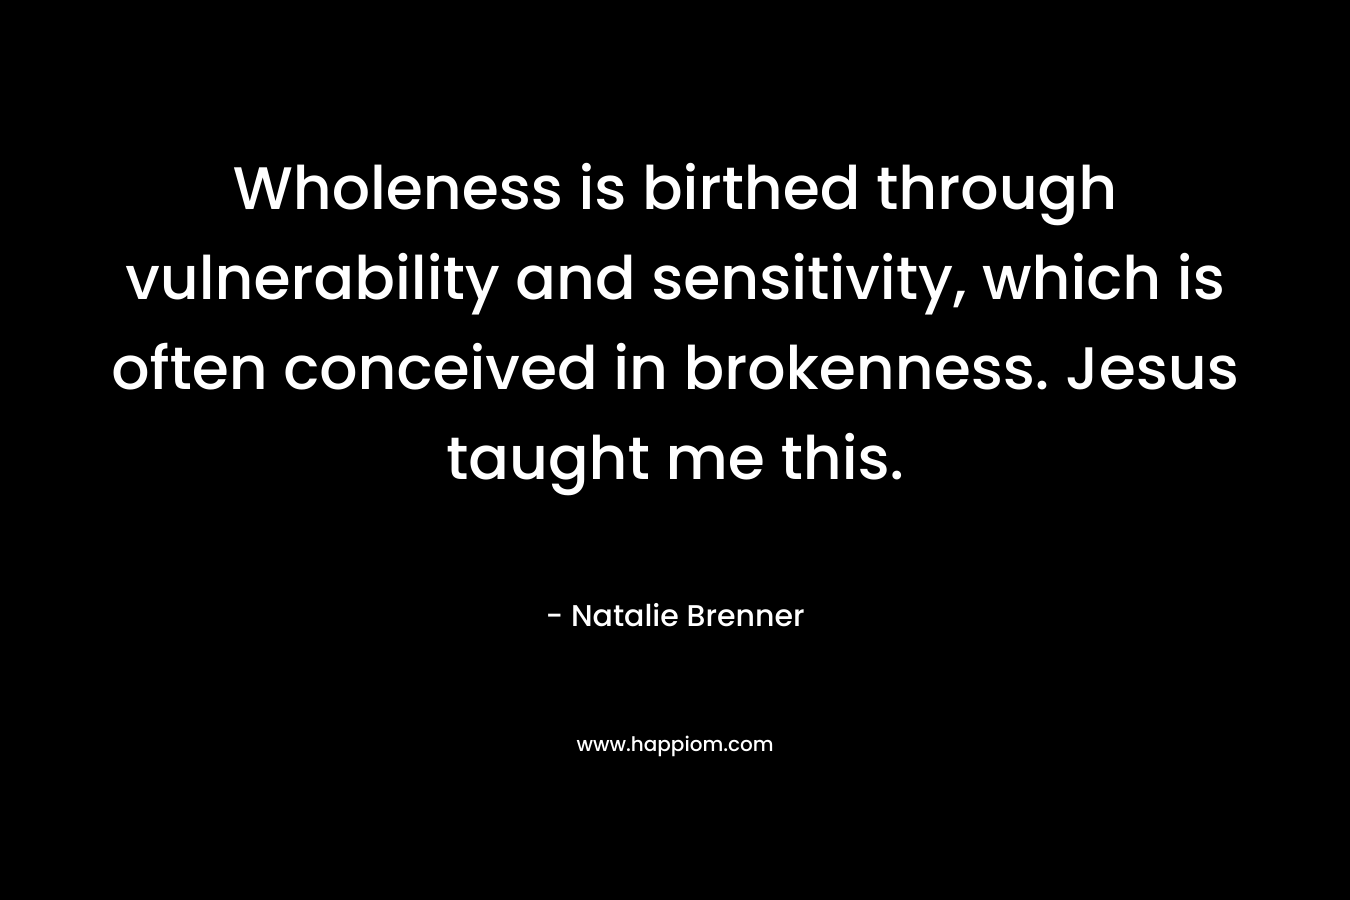 Wholeness is birthed through vulnerability and sensitivity, which is often conceived in brokenness. Jesus taught me this. – Natalie Brenner